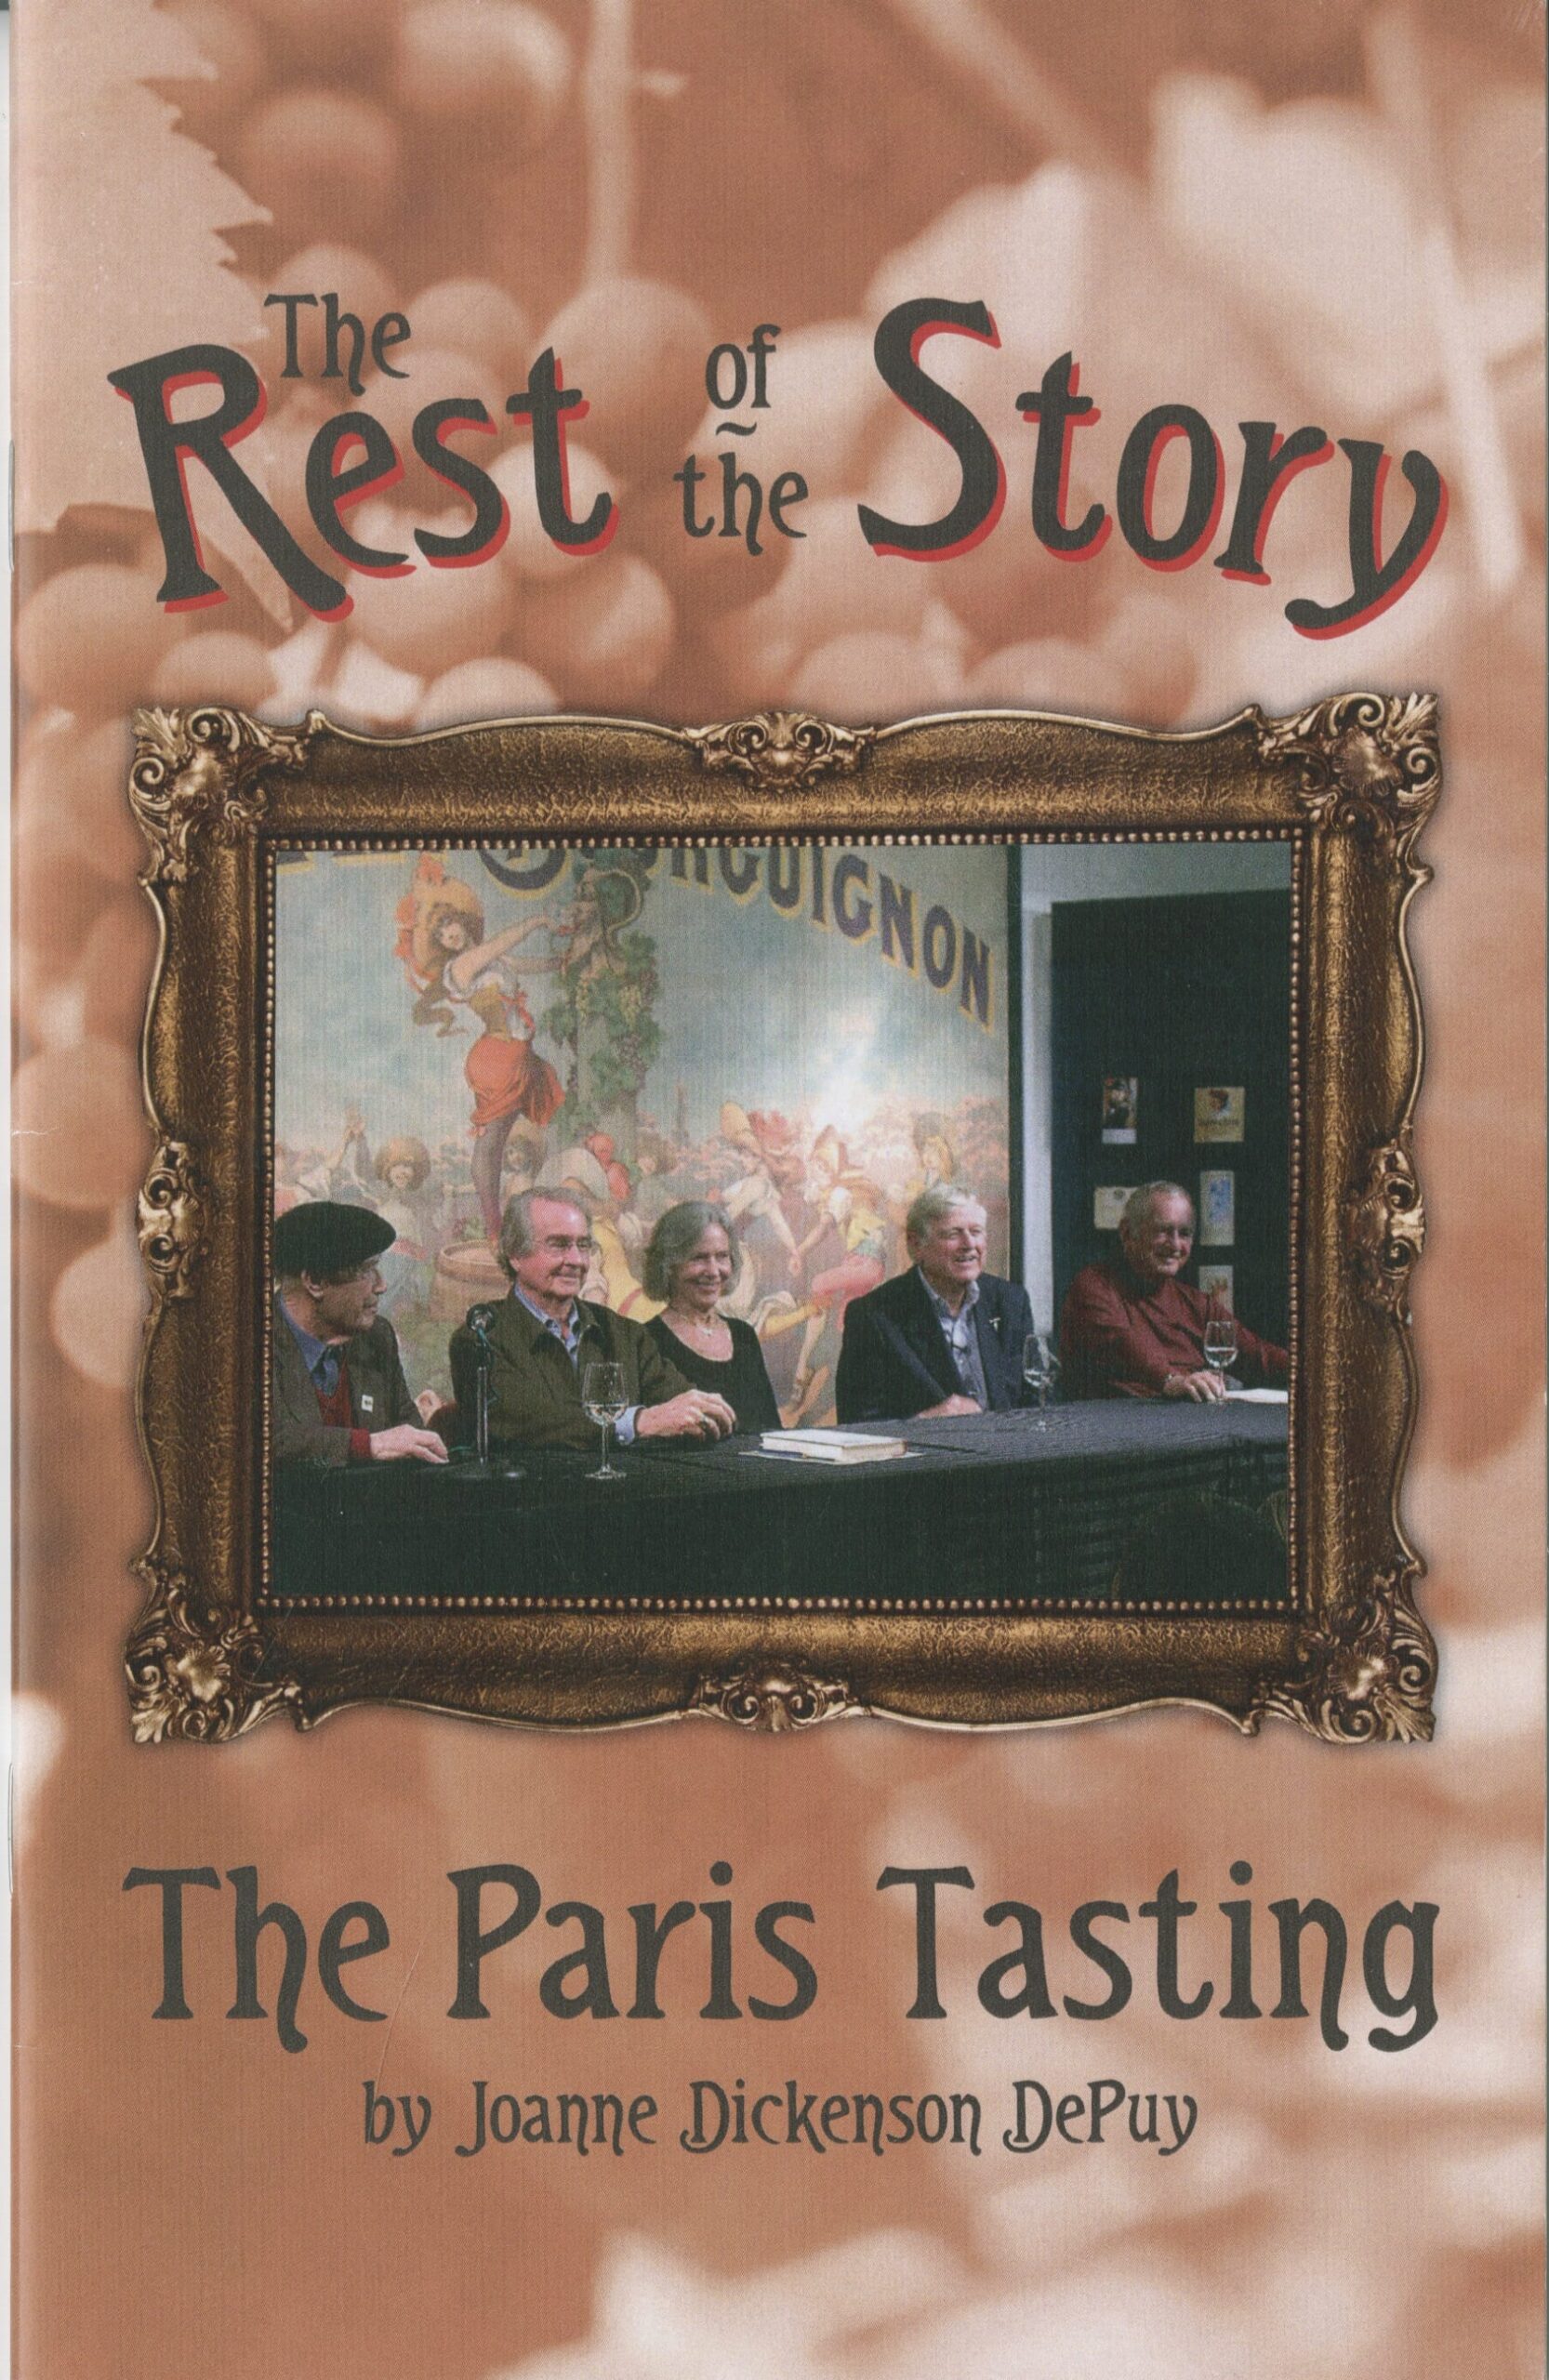 Joanne DePuy published her retelling of the Judgment of Paris story in 2016 (Credit: UC Davis Library/Archives and Special Collections)